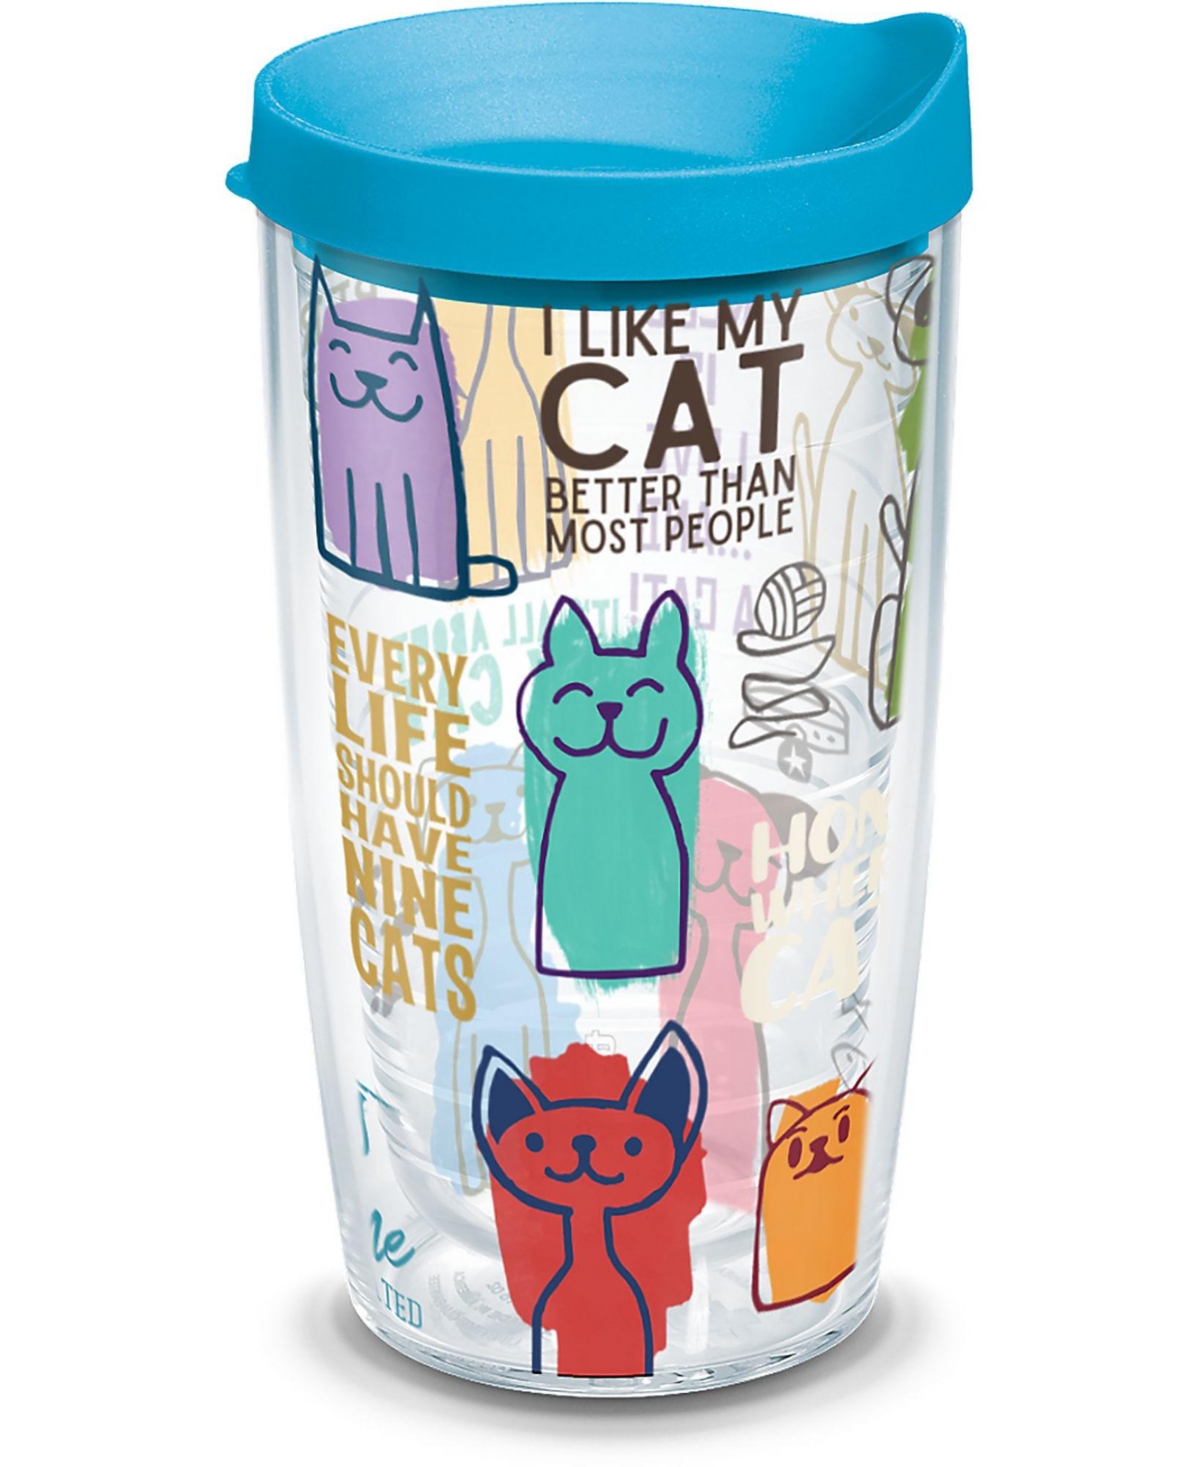 Tervis Tumbler Tervis Cat Sayings Made In Usa Double Walled Insulated Tumbler Travel Cup Keeps Drinks Cold & Hot, 1 In Open Miscellaneous